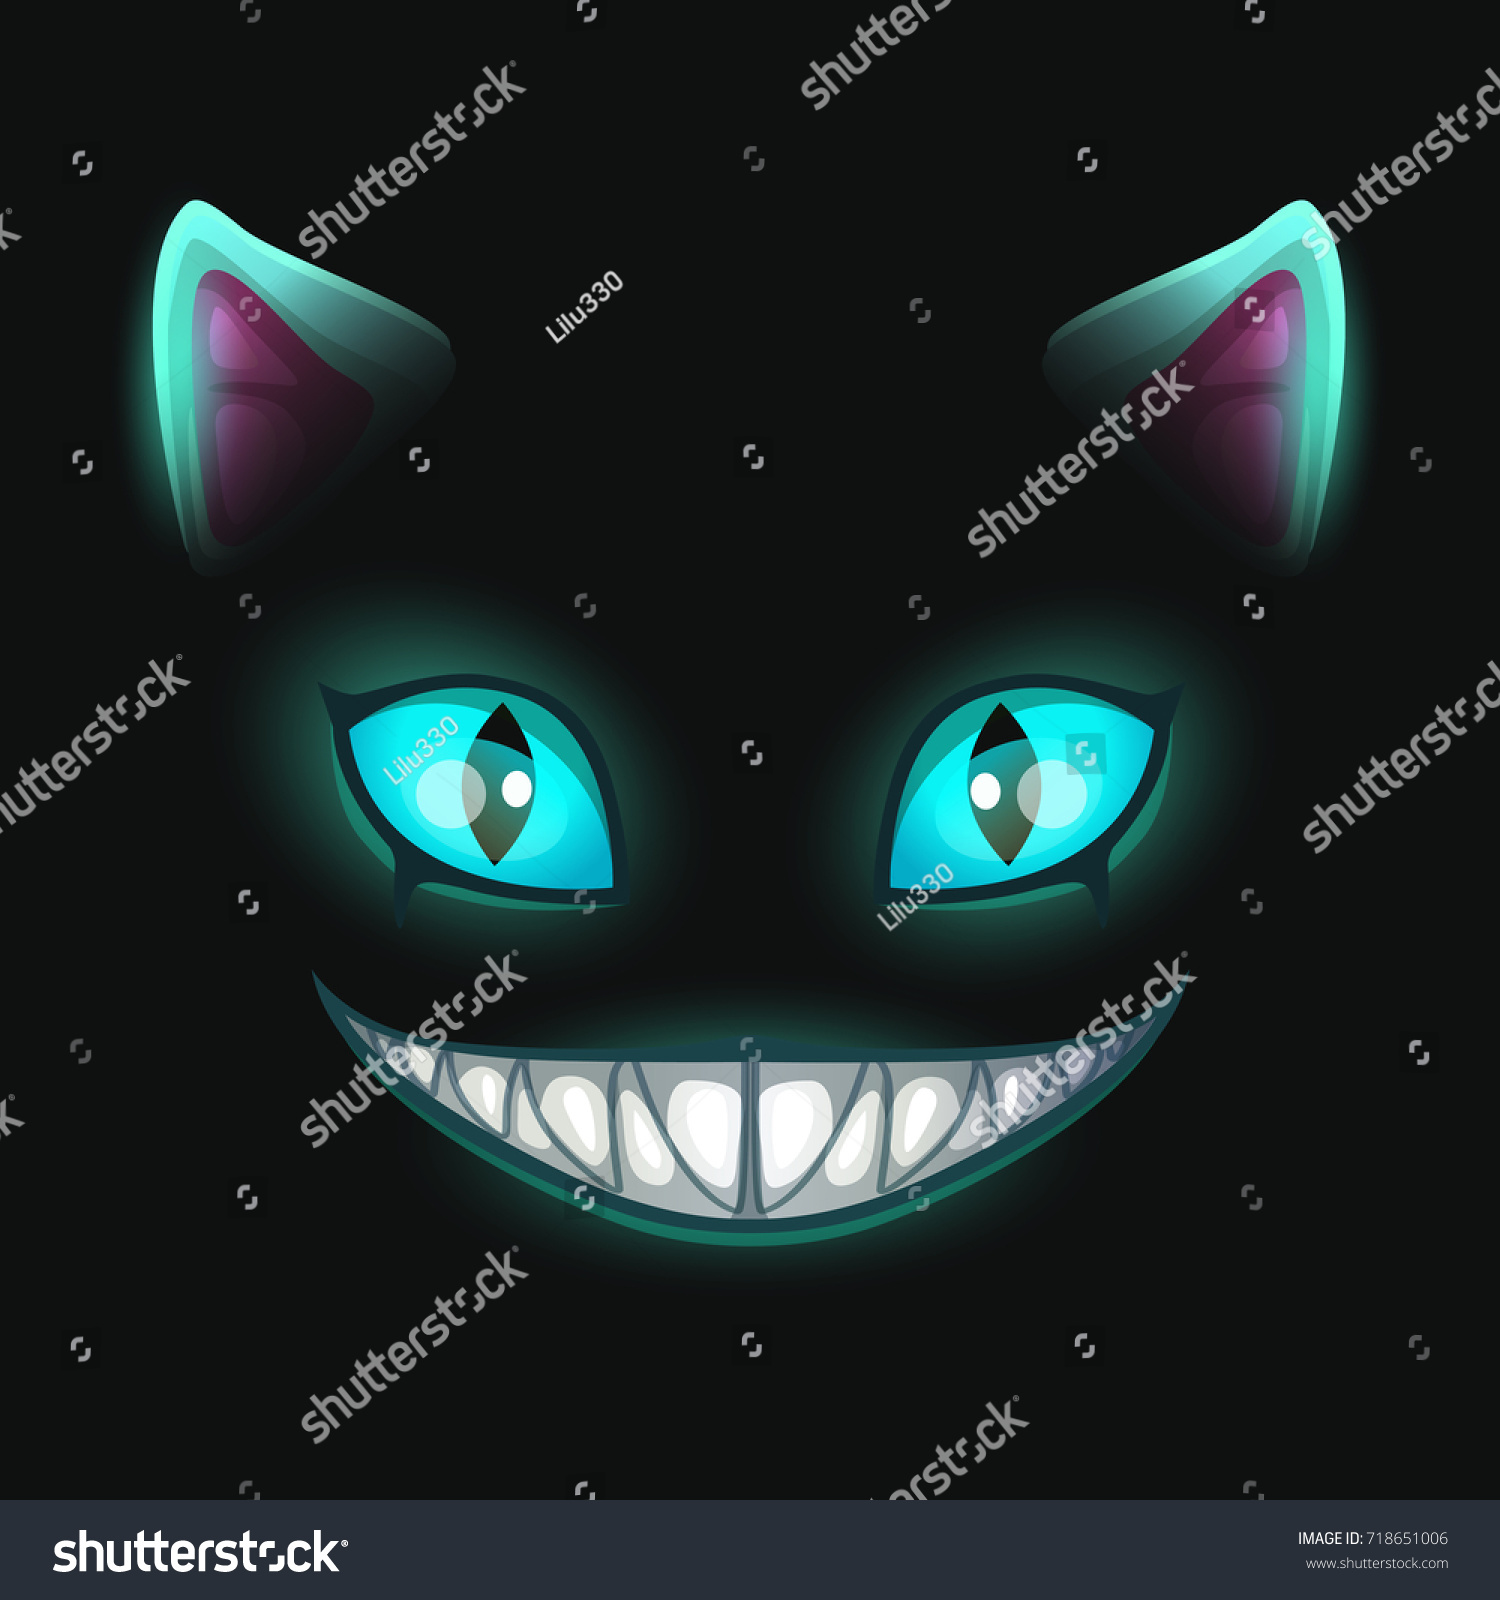 SVG of Fantasy scary smiling cat face on black background. Cheshire Cat vector illustration svg